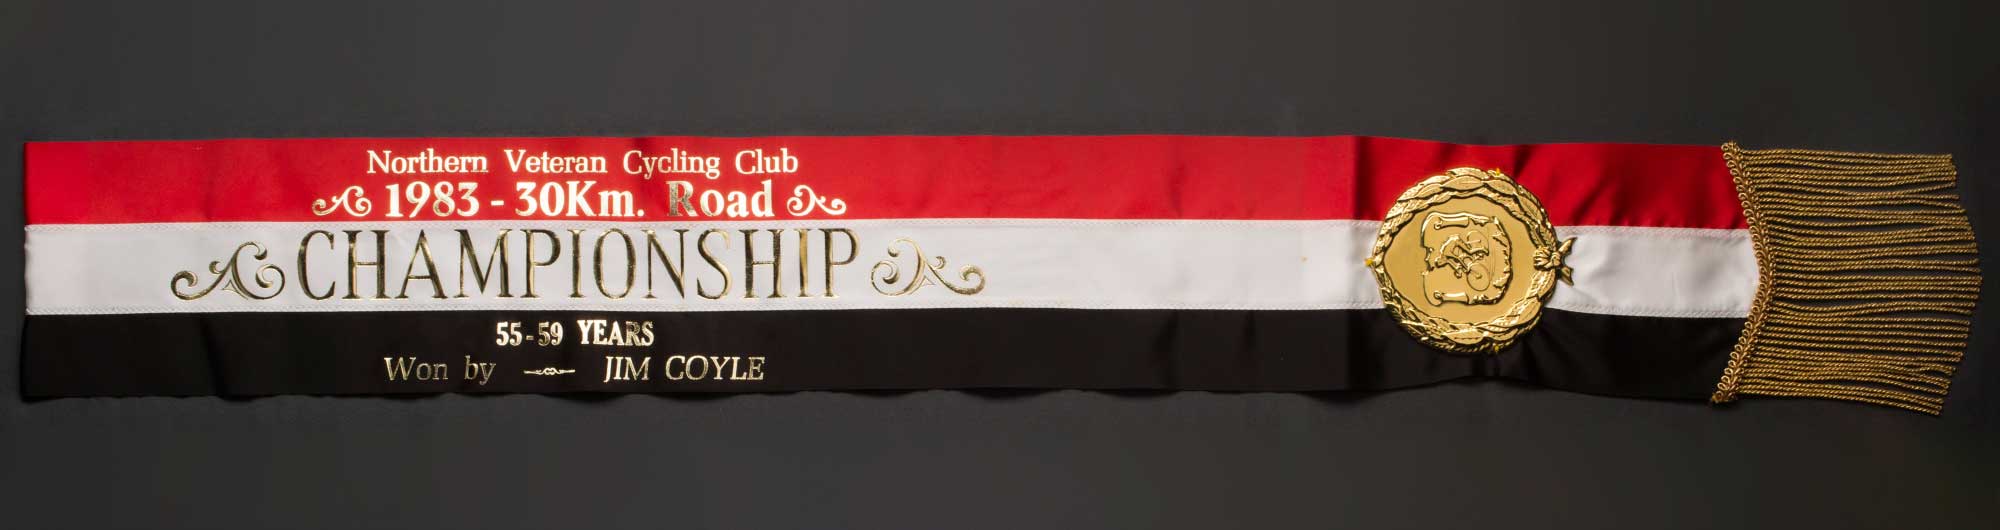 A red, white and black sash made of three ribbons sewn horizontally together. There is gold coloured lettering pressed across the sash. The text reads 'Northern.Veteran.Cycling.Club. / 1983 ? 30Km. Road / CHAMPIONSHIP / 55-59 YEARS / Won by JIM COYLE'. Attached to one side of the sash is a circular shaped medallion with a raised relief of a wreath and a cyclist. The edge of the sash has a gold coloured fringe. - click to view larger image